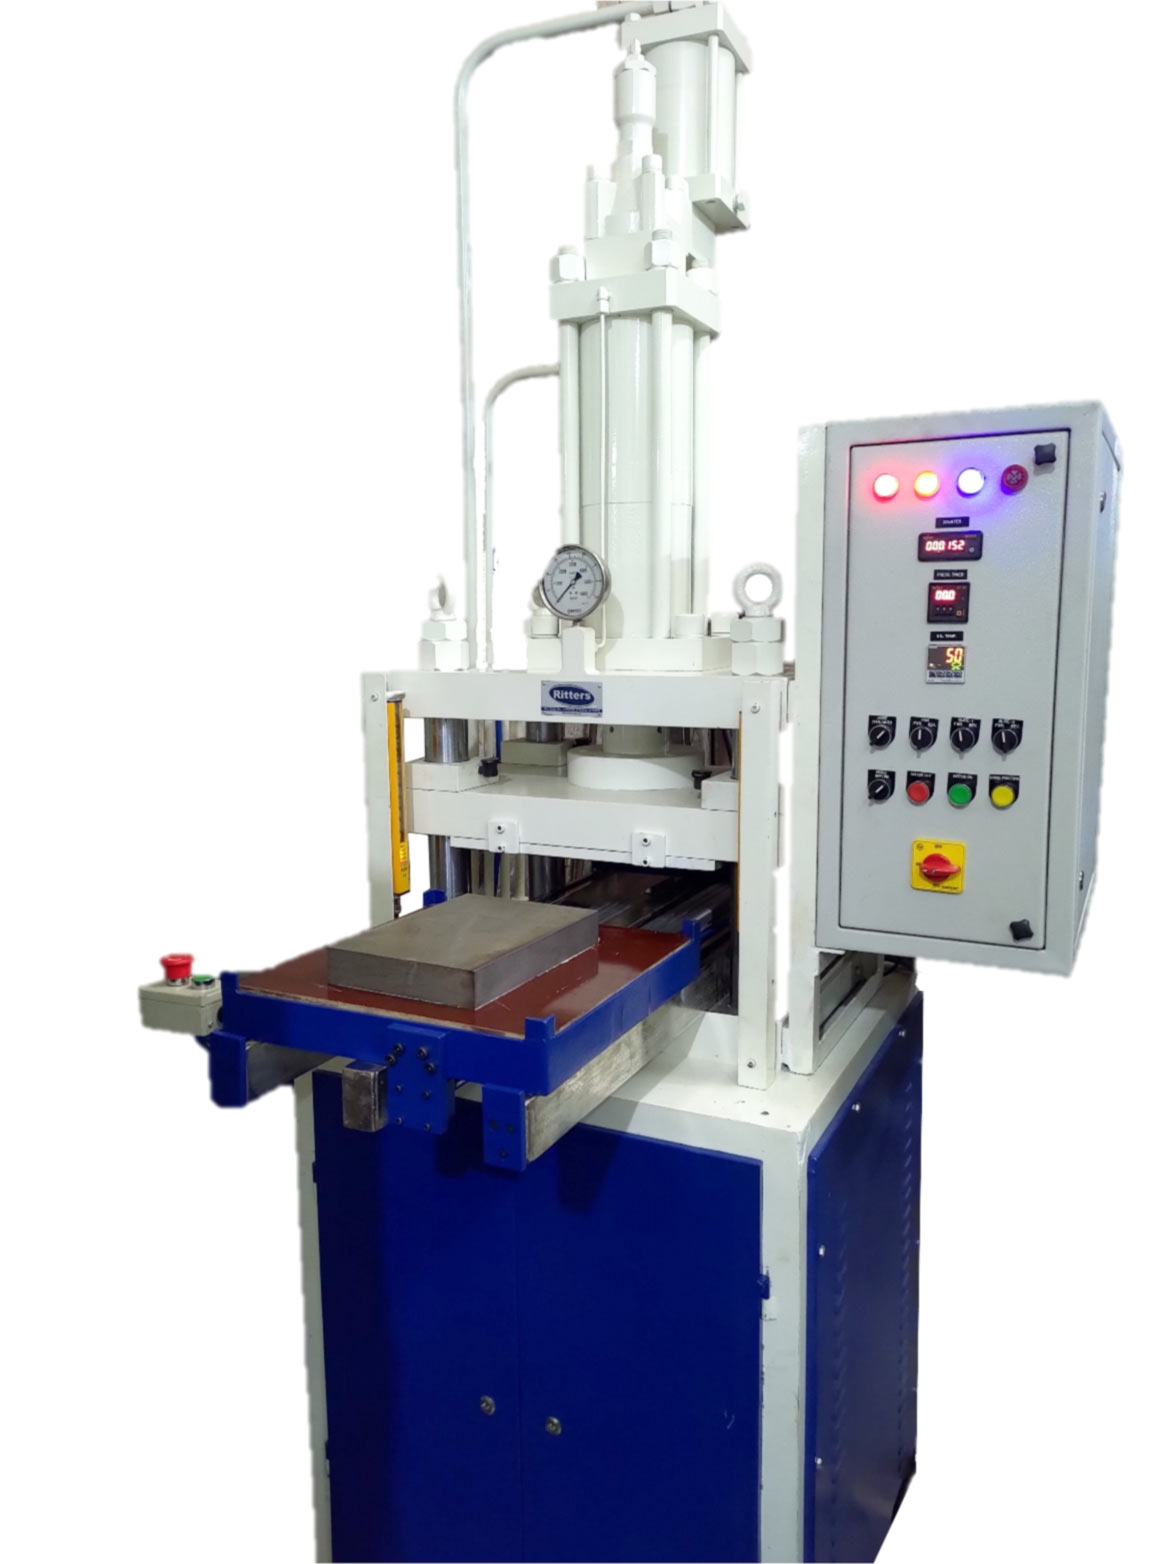 ritters High Speed Blister Sealing/Cutting Press 30 Tons with 2 Station Automatic Movement with Hand Safety.